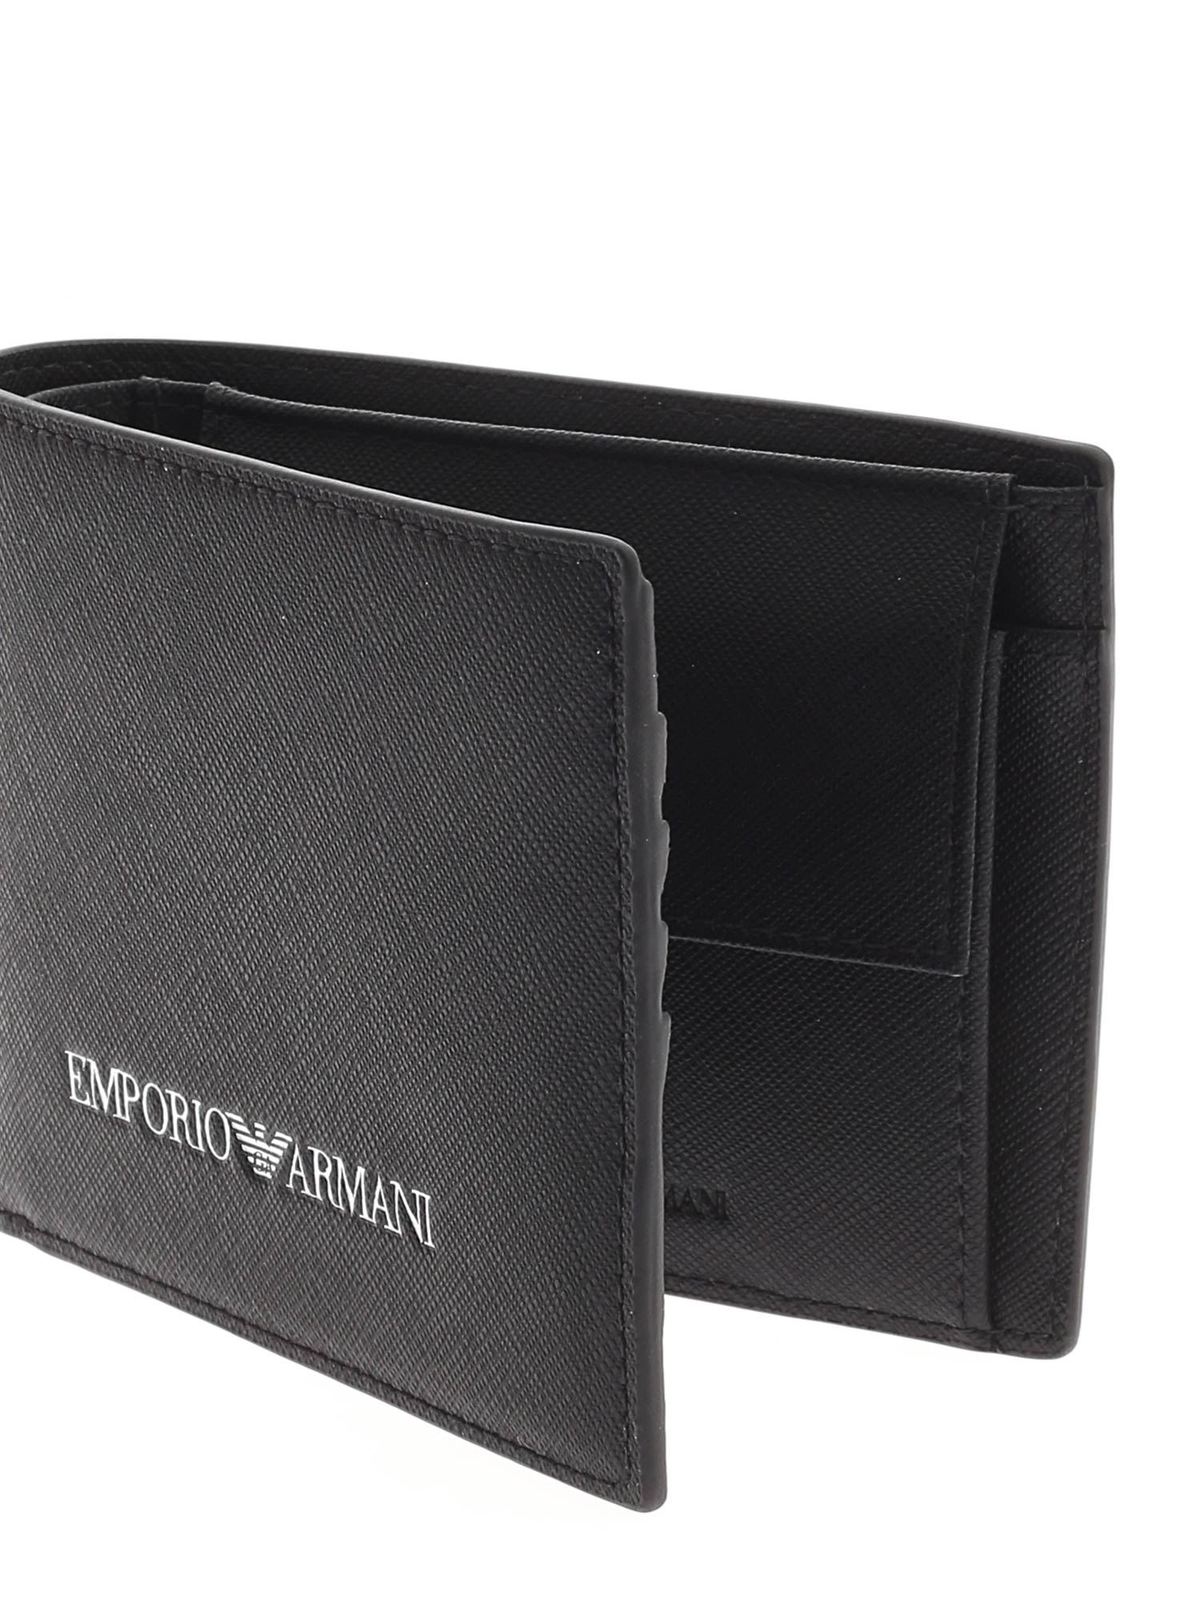 Emporio Armani Wallet in Black for Men Mens Accessories Wallets and cardholders 